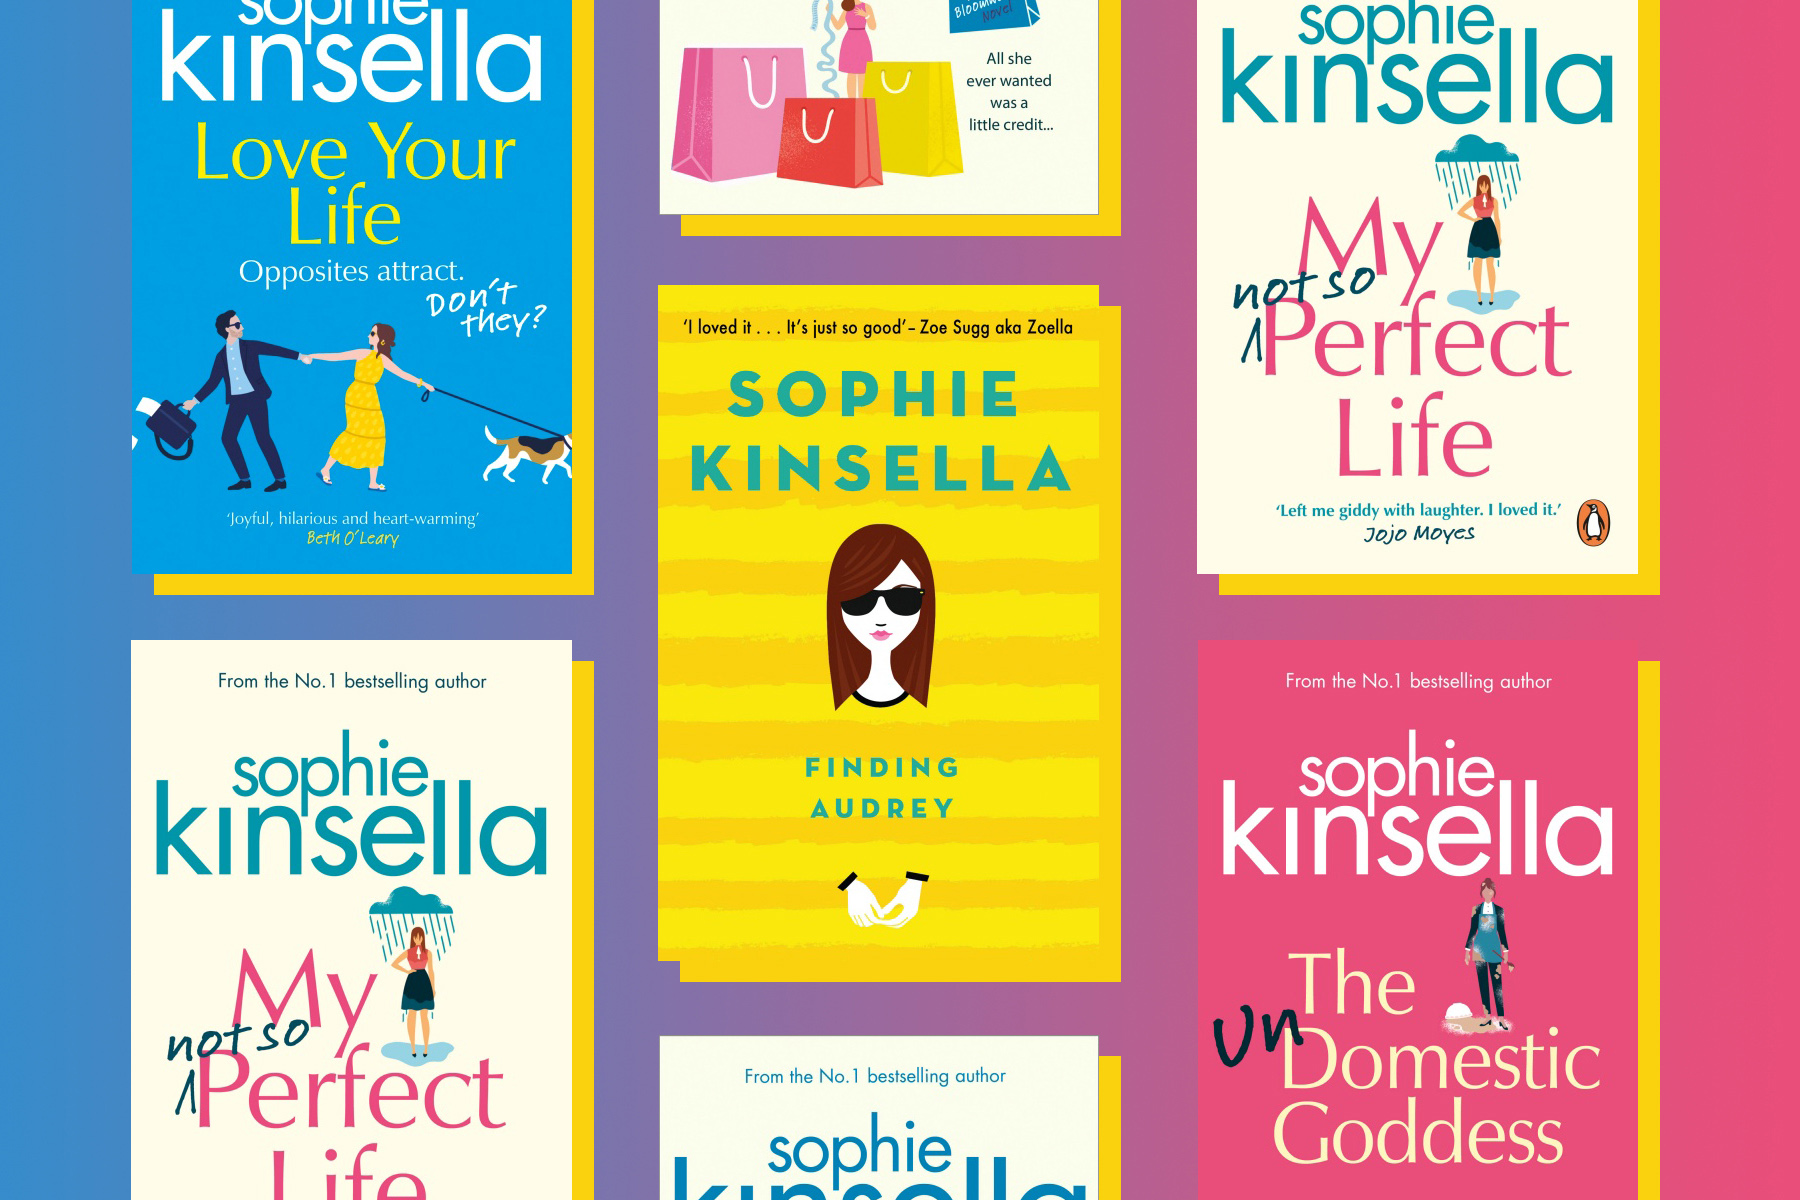 Image of Sophie Kinsella book covers